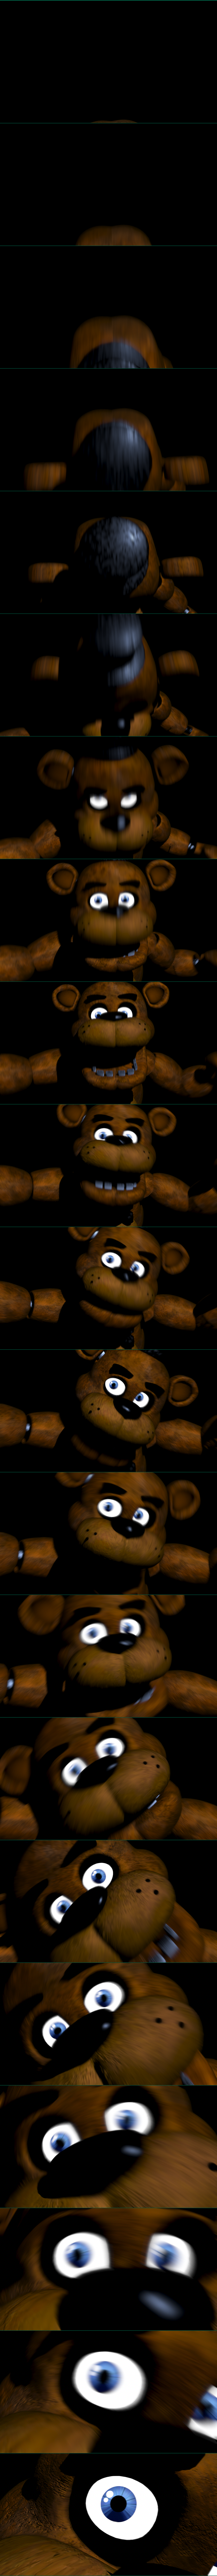 PC / Computer - Five Nights at Freddy's - Freddy Jumpscare 1 - The Spriters  Resource